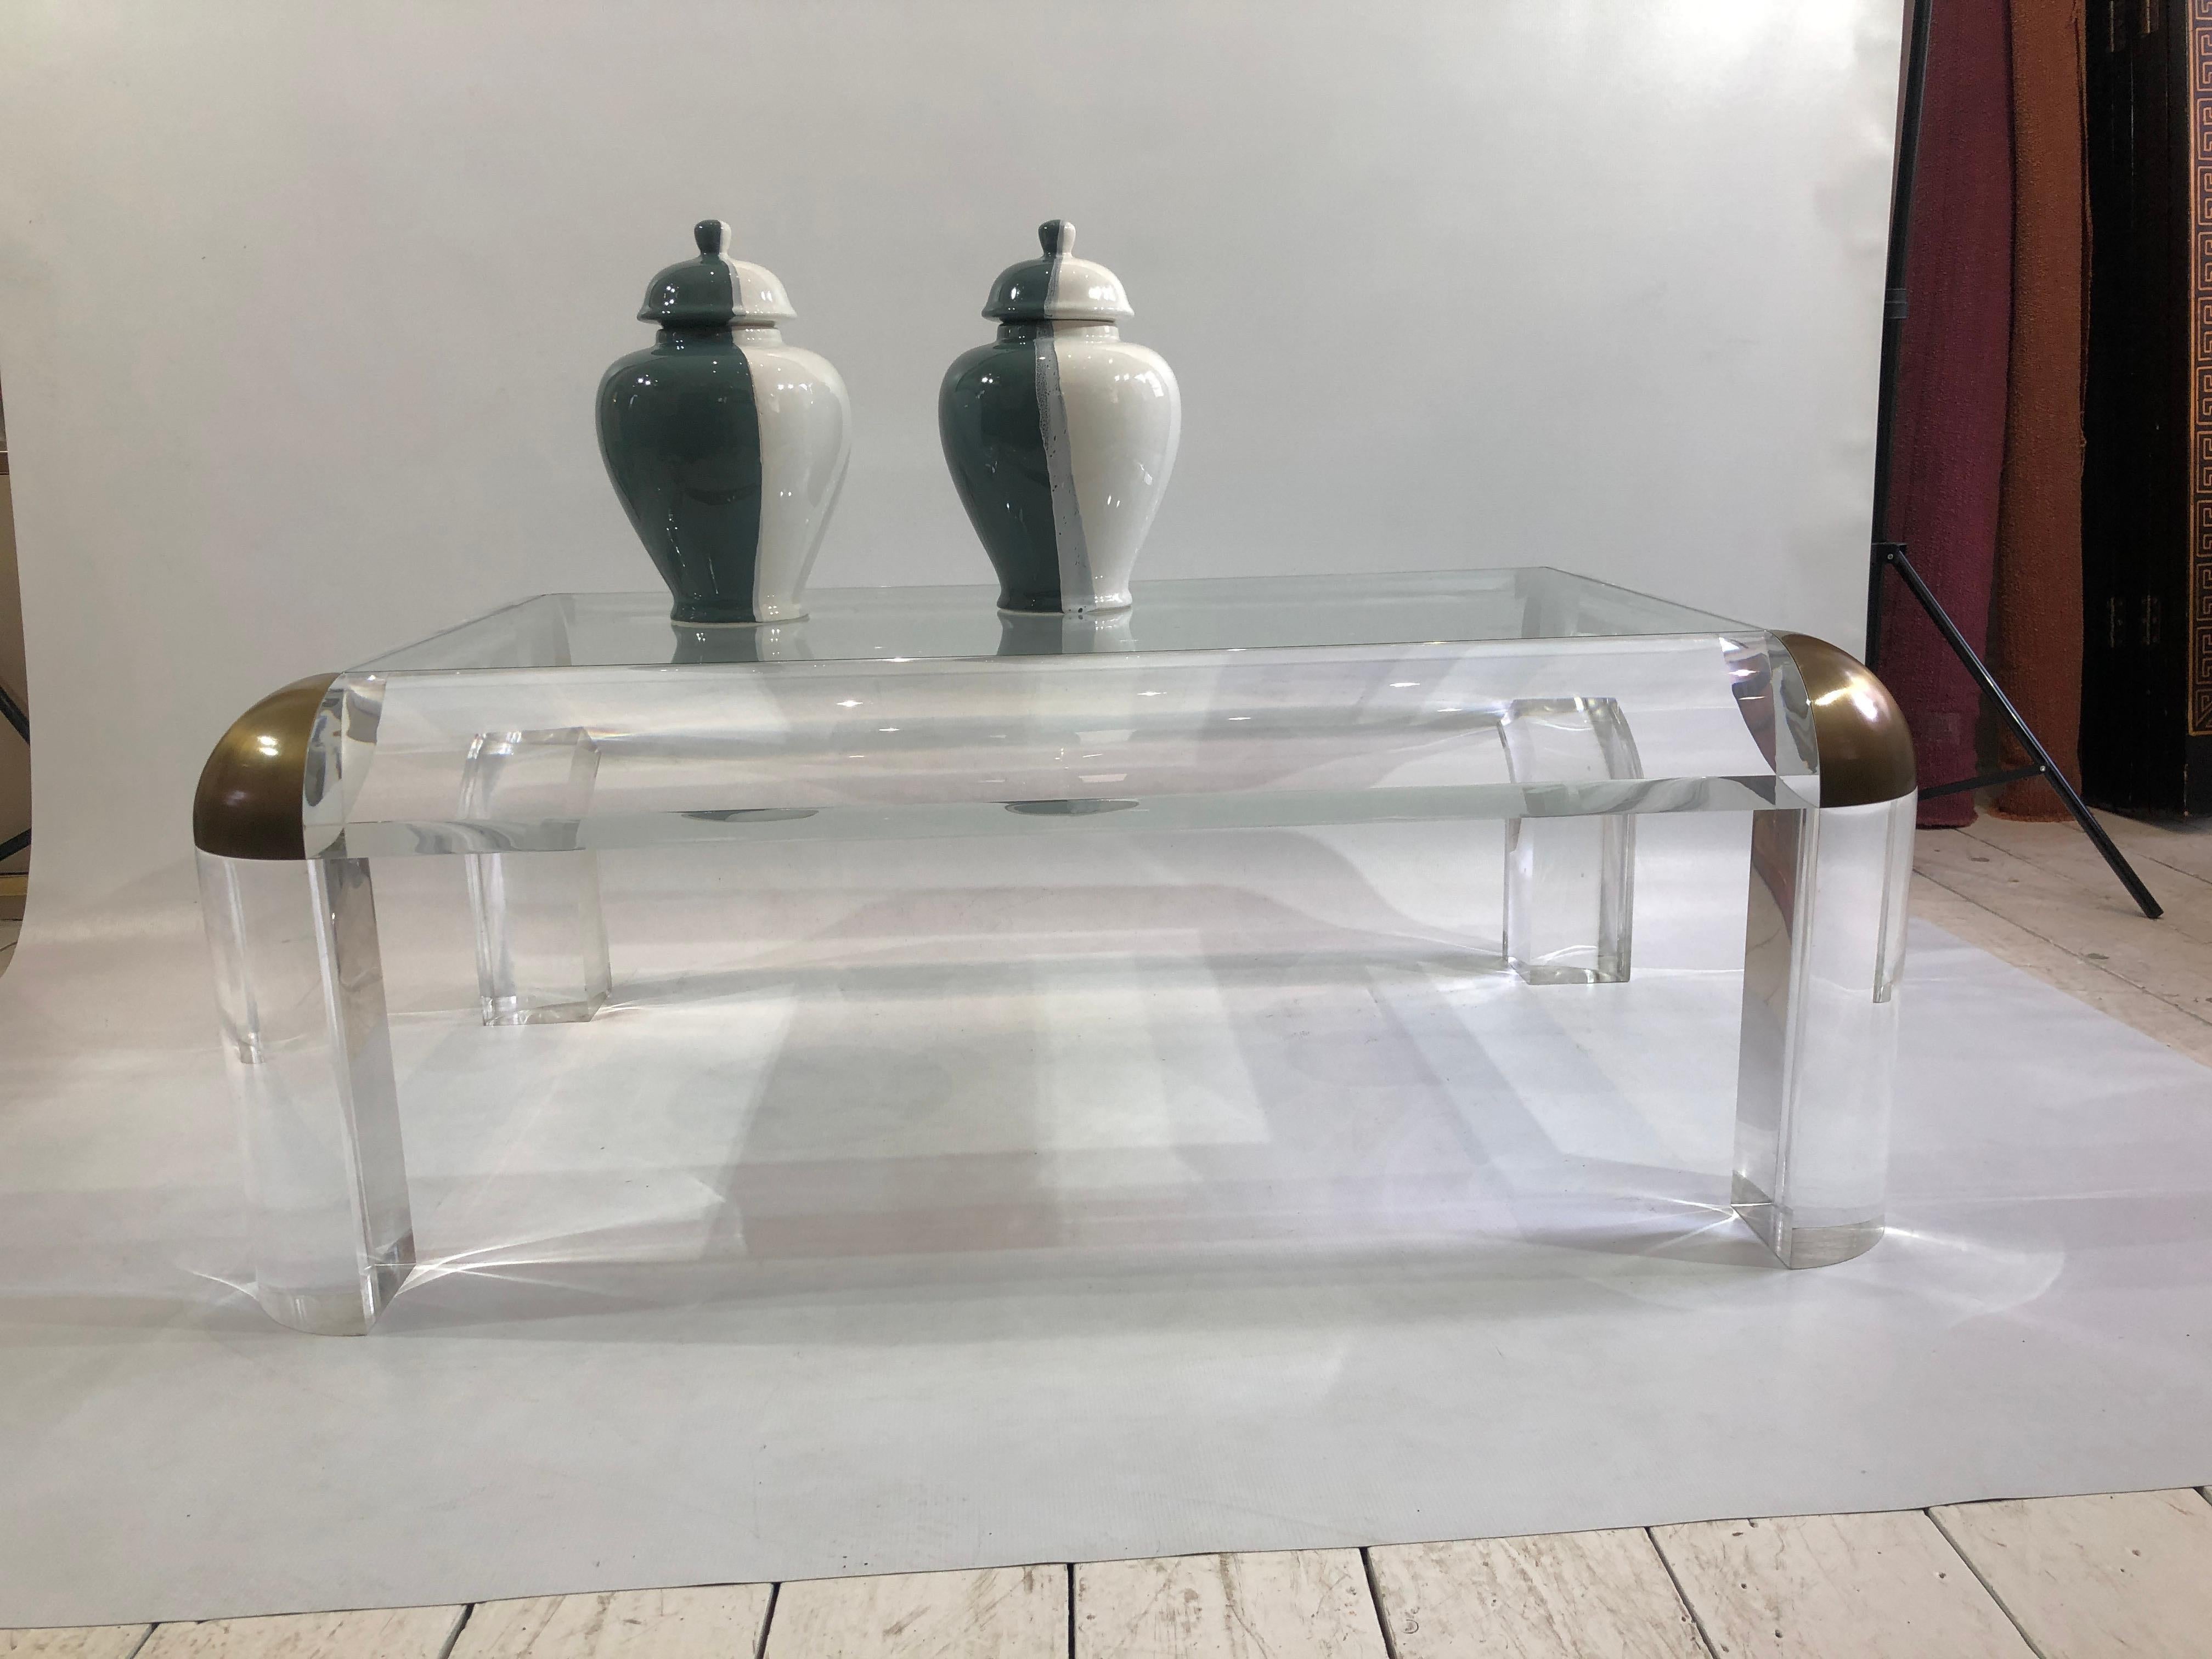 Lucite Brass Glass Karl Springer Style Coffee Table 1970s Modernist Mid-century For Sale 4